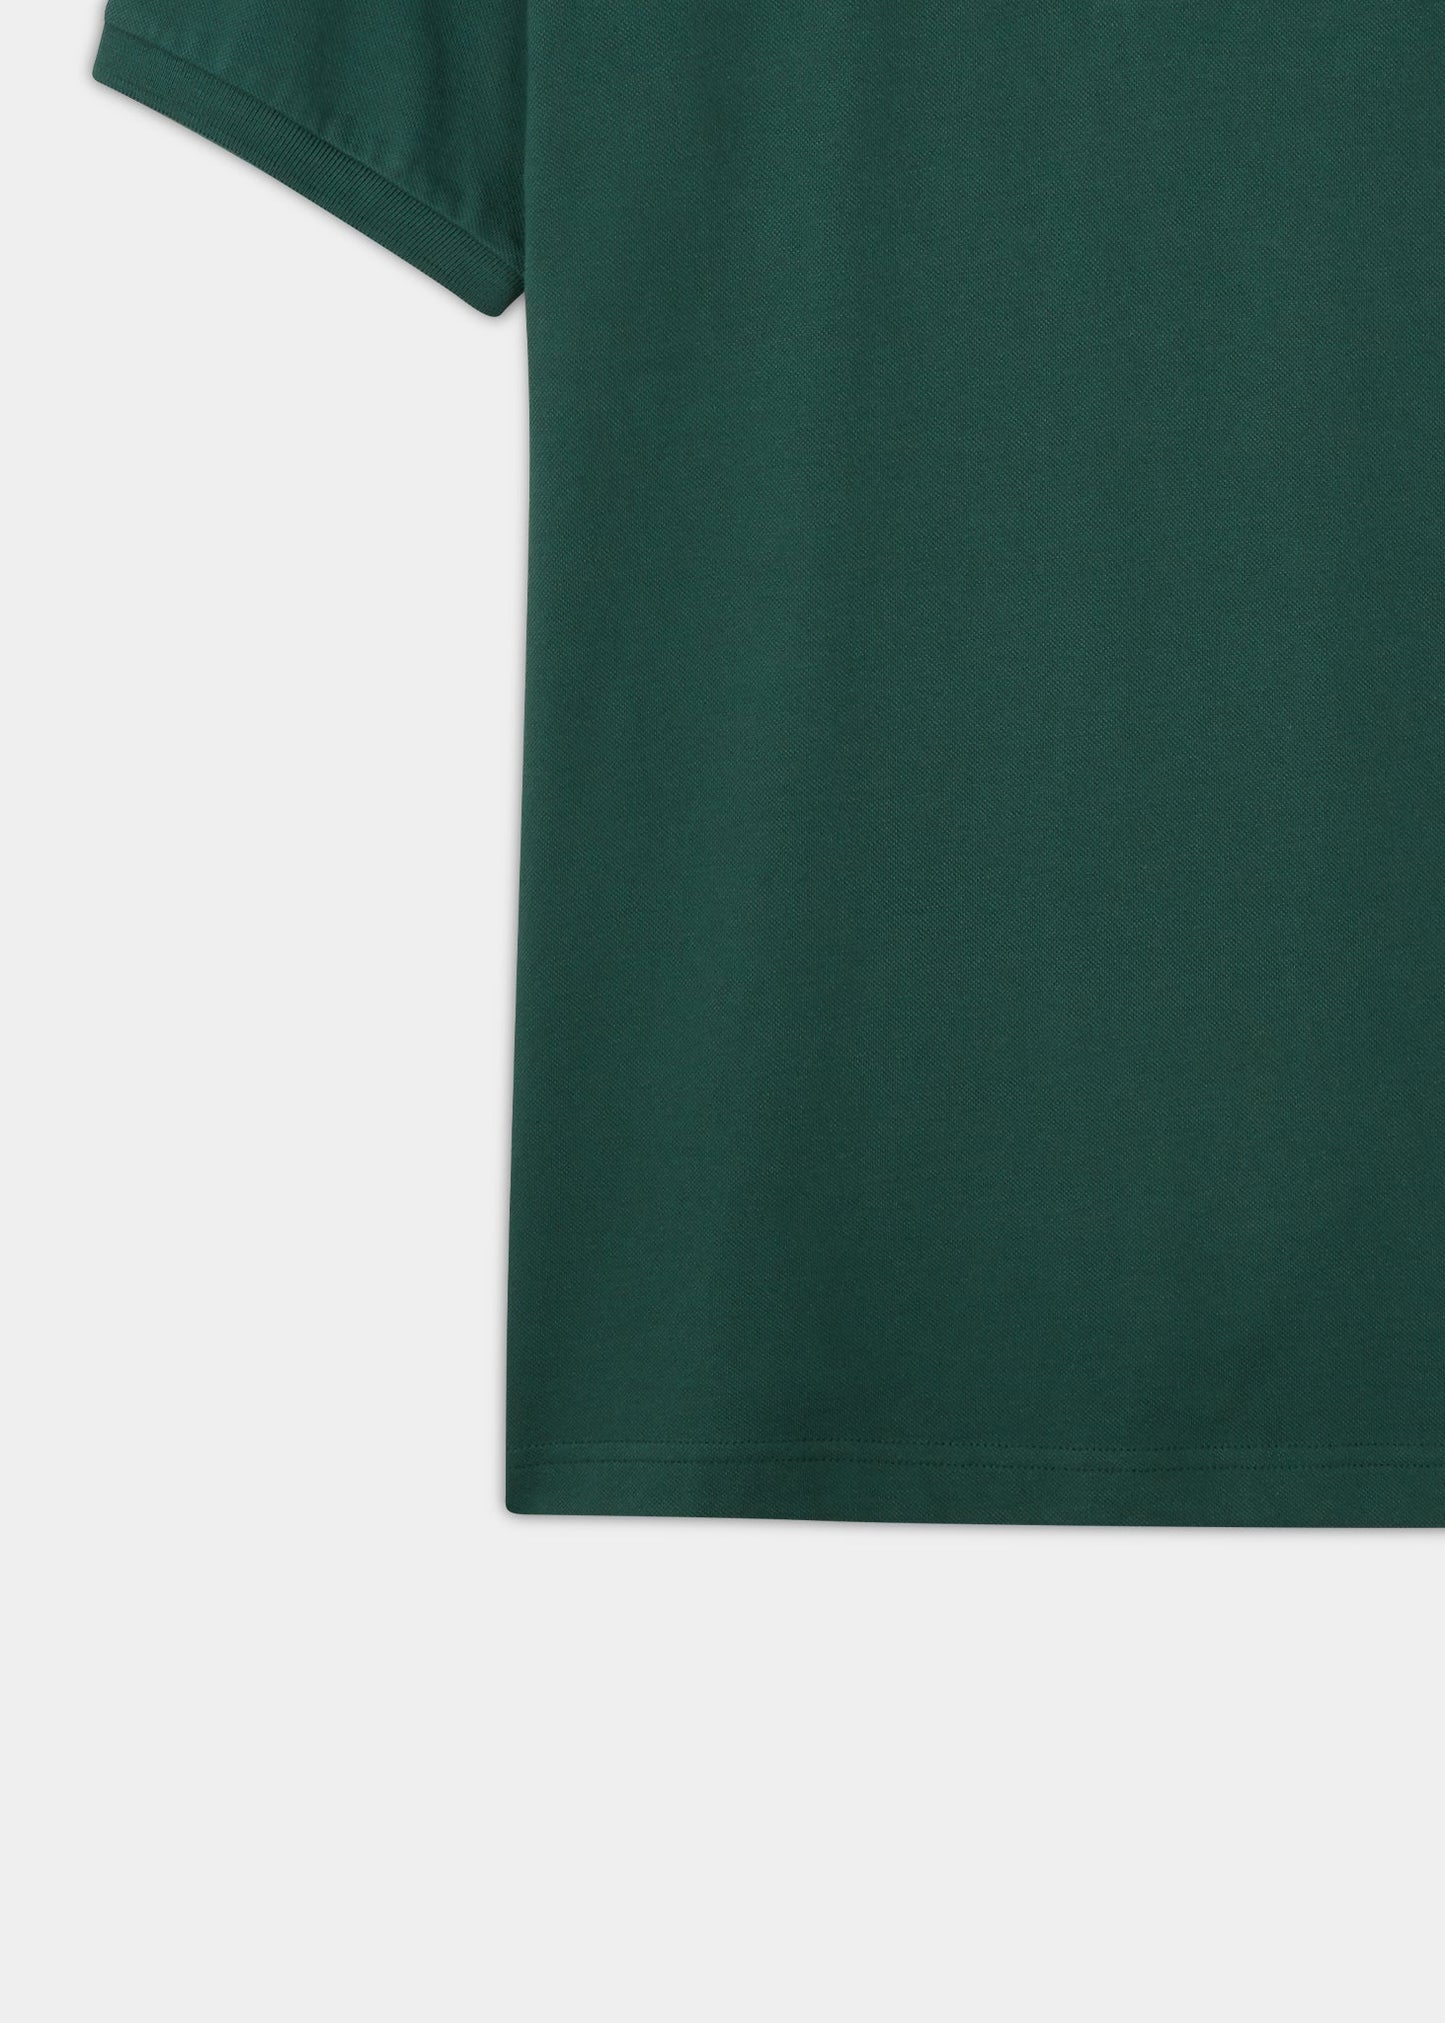 Alan Paine men's short sleeved polo shirt in racing green